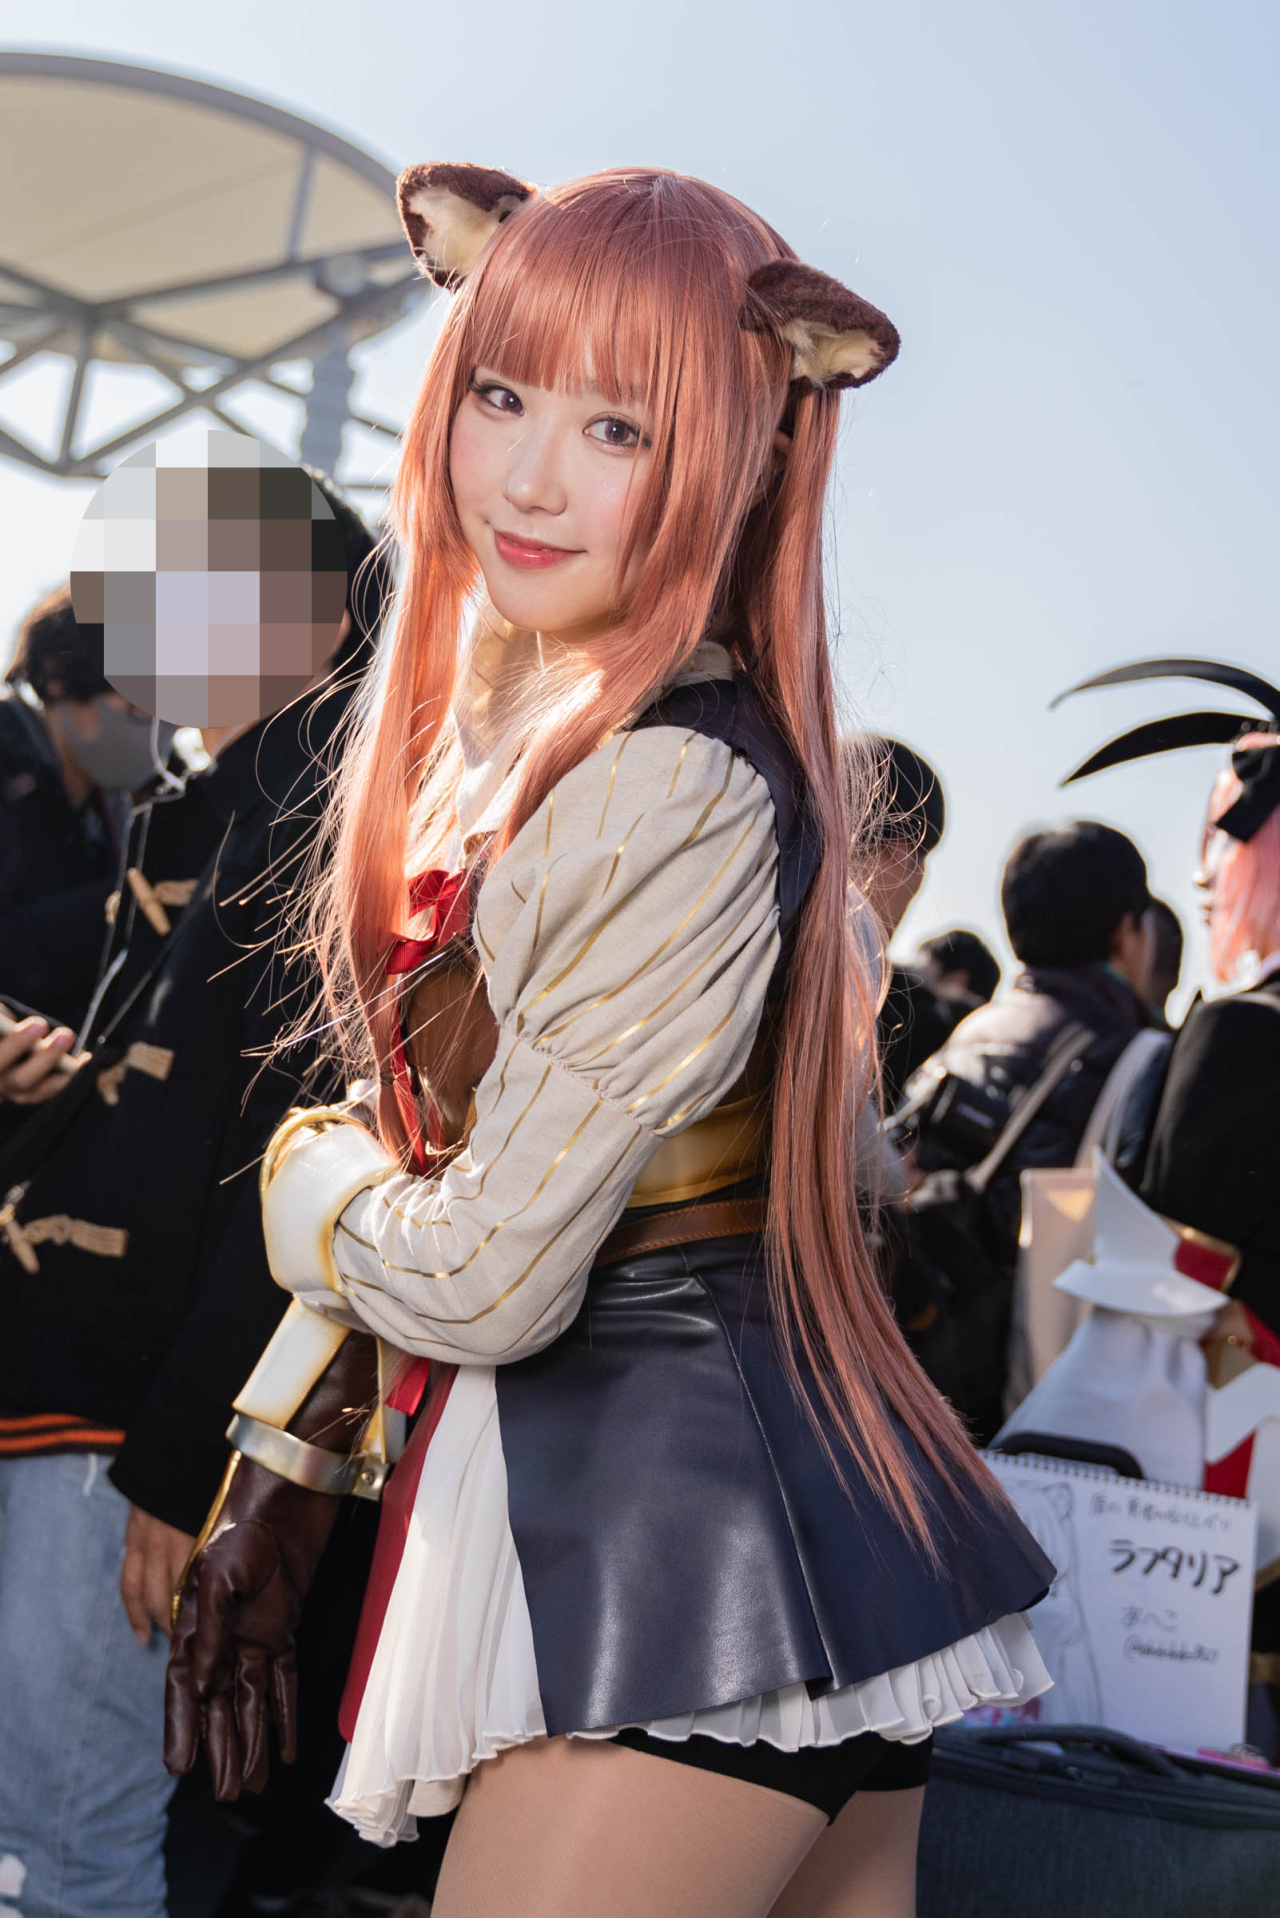 Japan cosplay Winter Comiket Japanese cosplayers costumes anime manga video  games C97 photos Tokyo convention Day 4 24